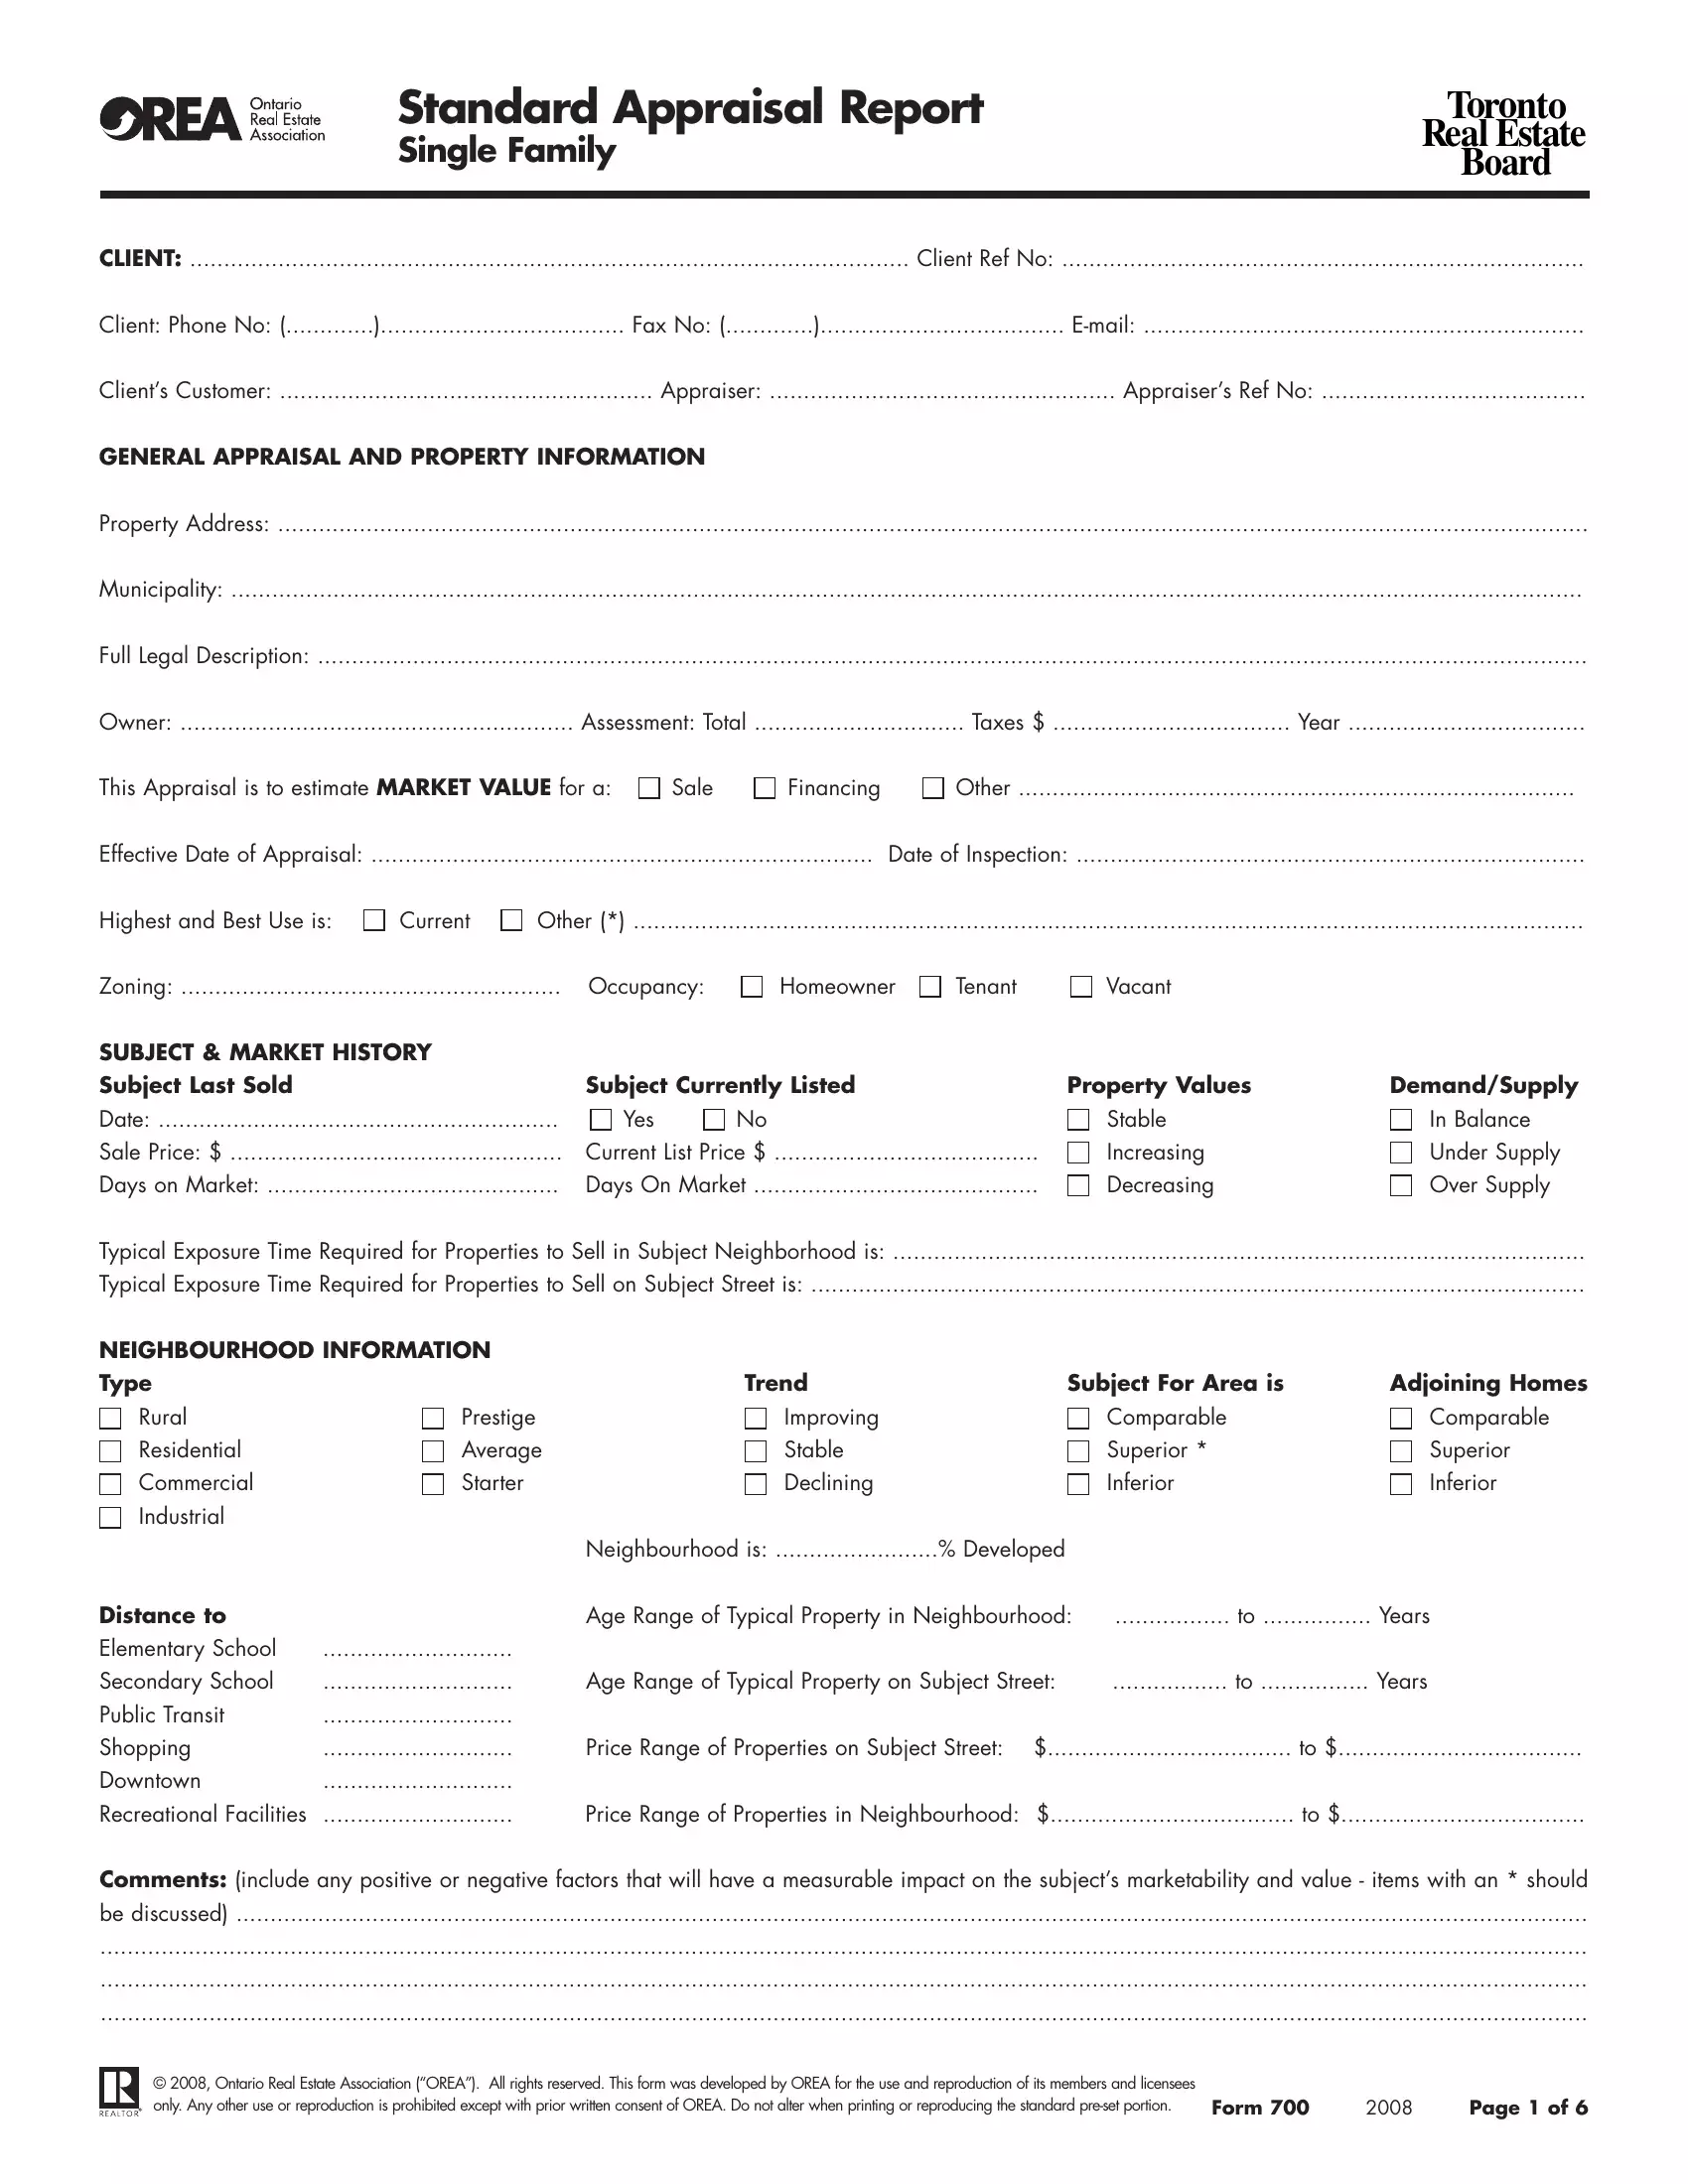 Standard Appraisal Report Form 700 Preview